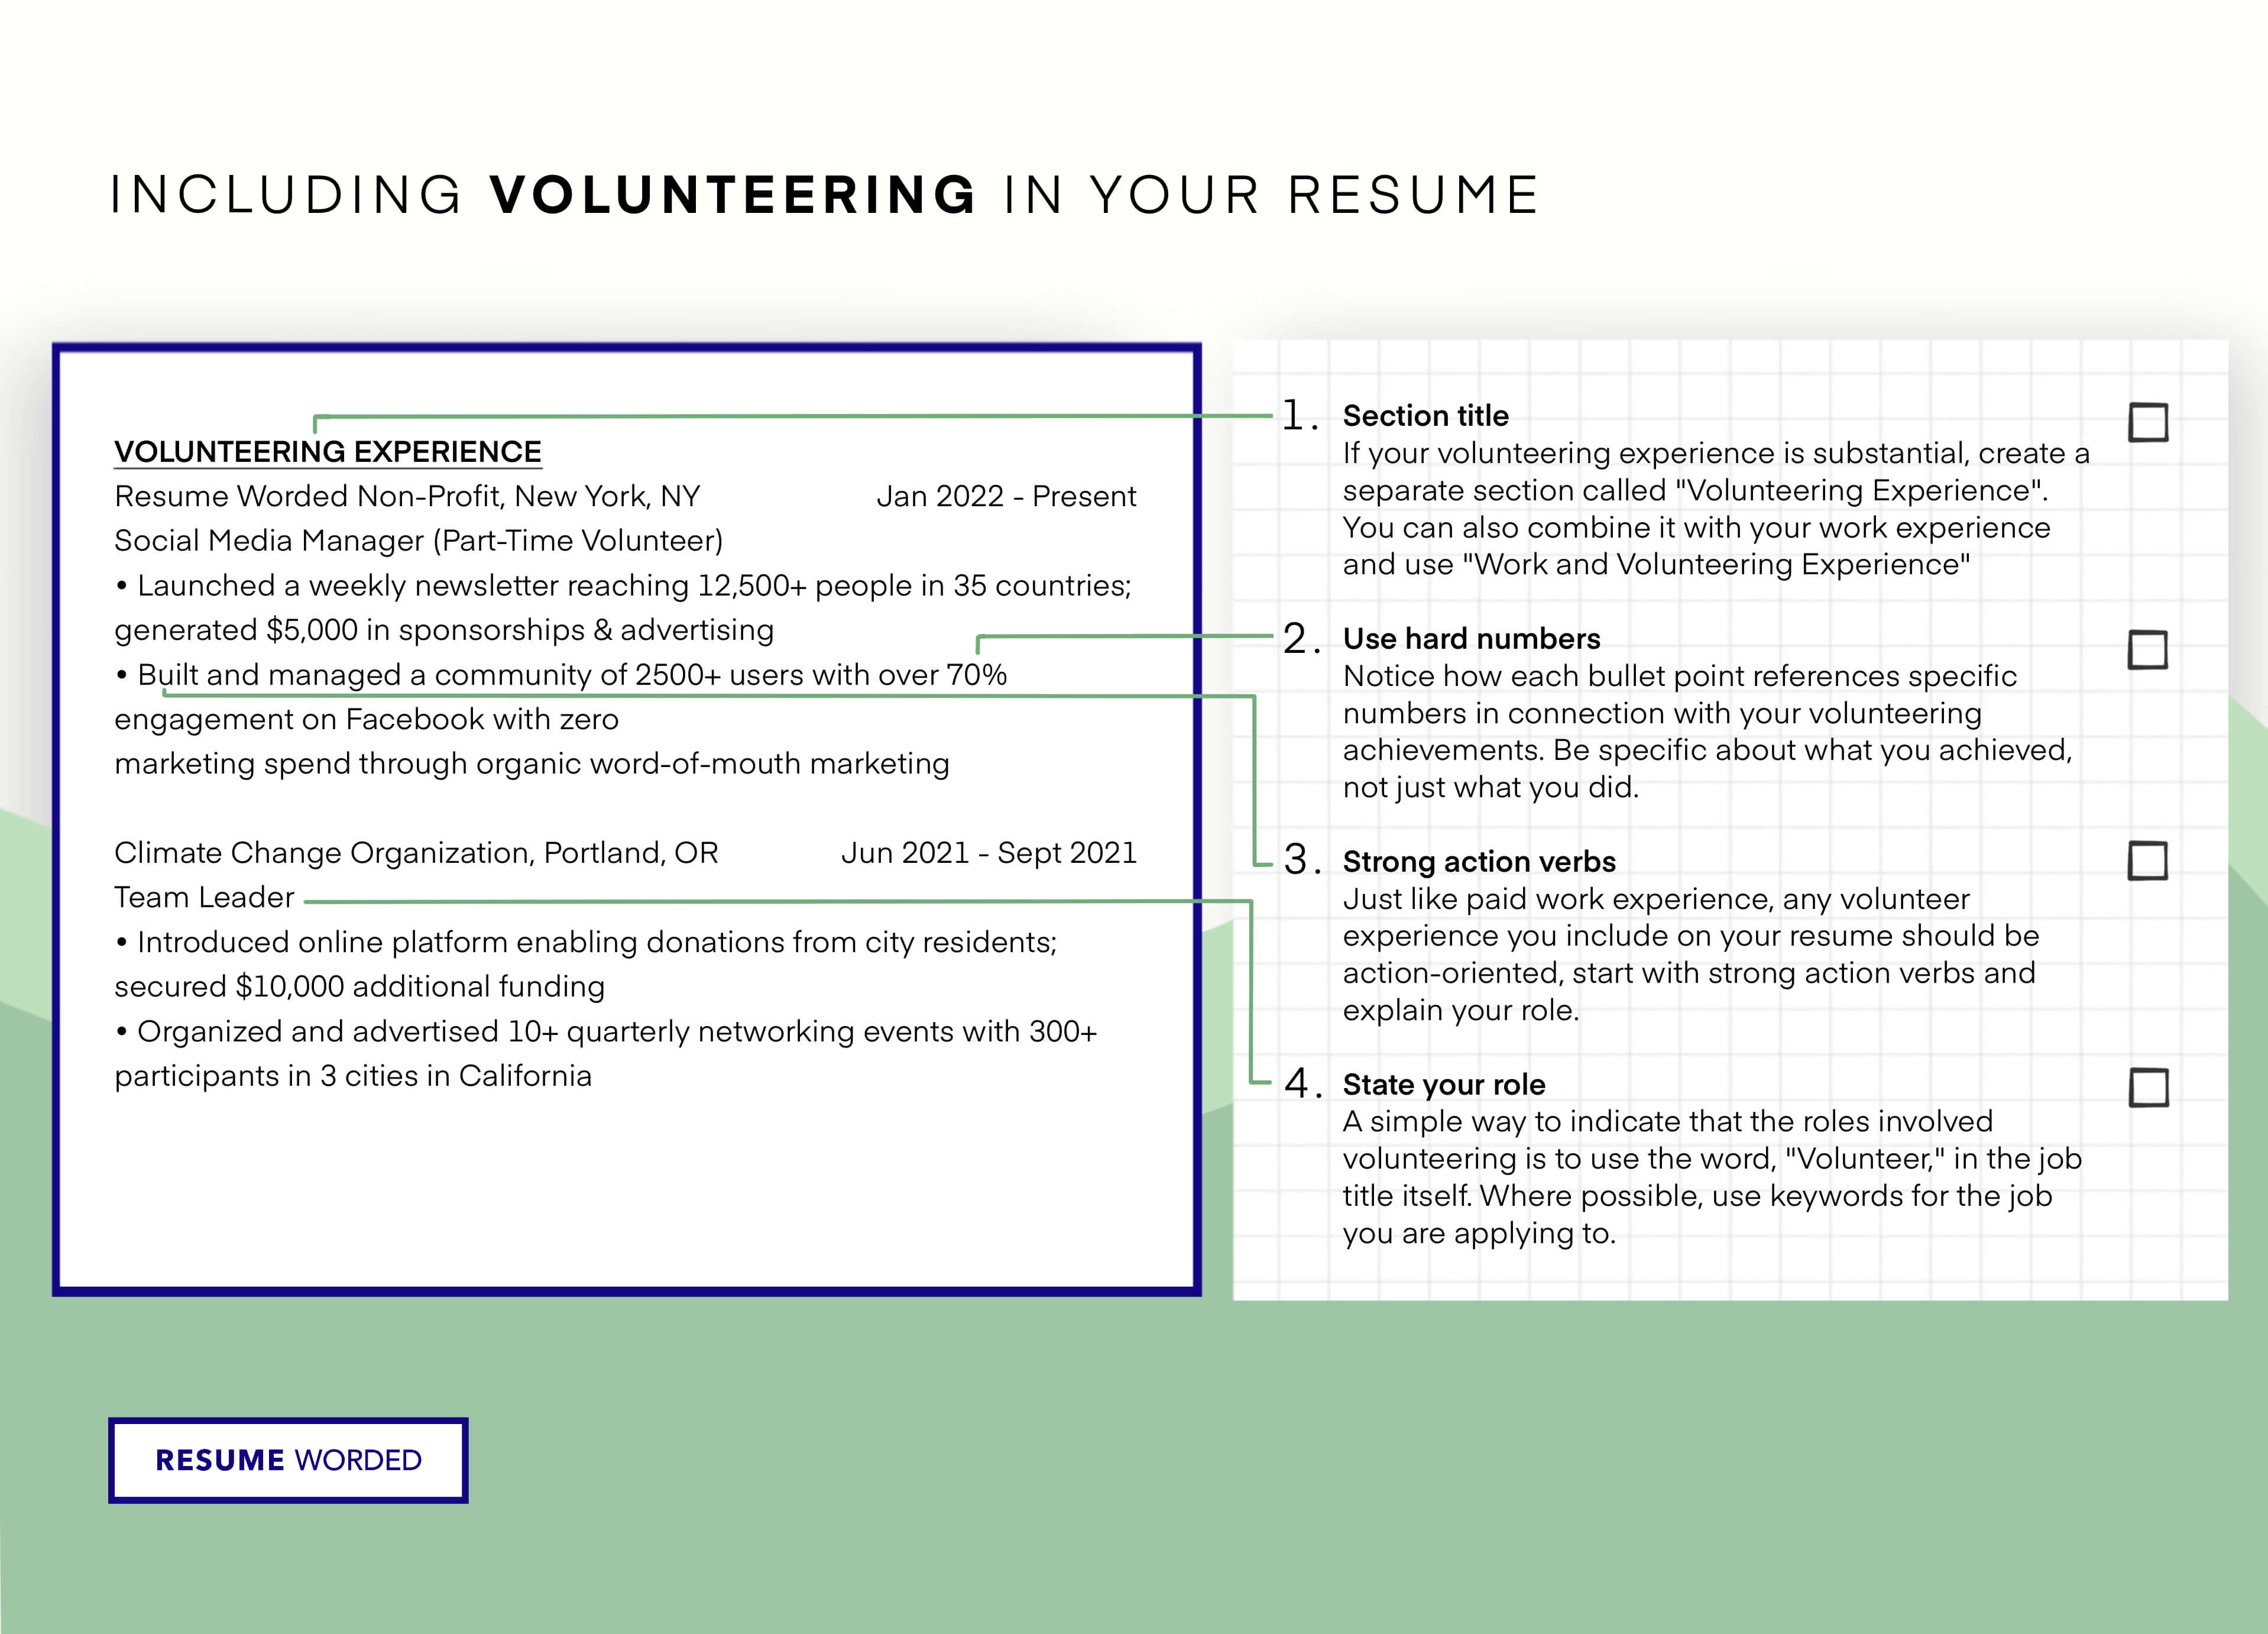 Lists volunteer experience in place of civil engineering work experience - Civil Engineer Resume